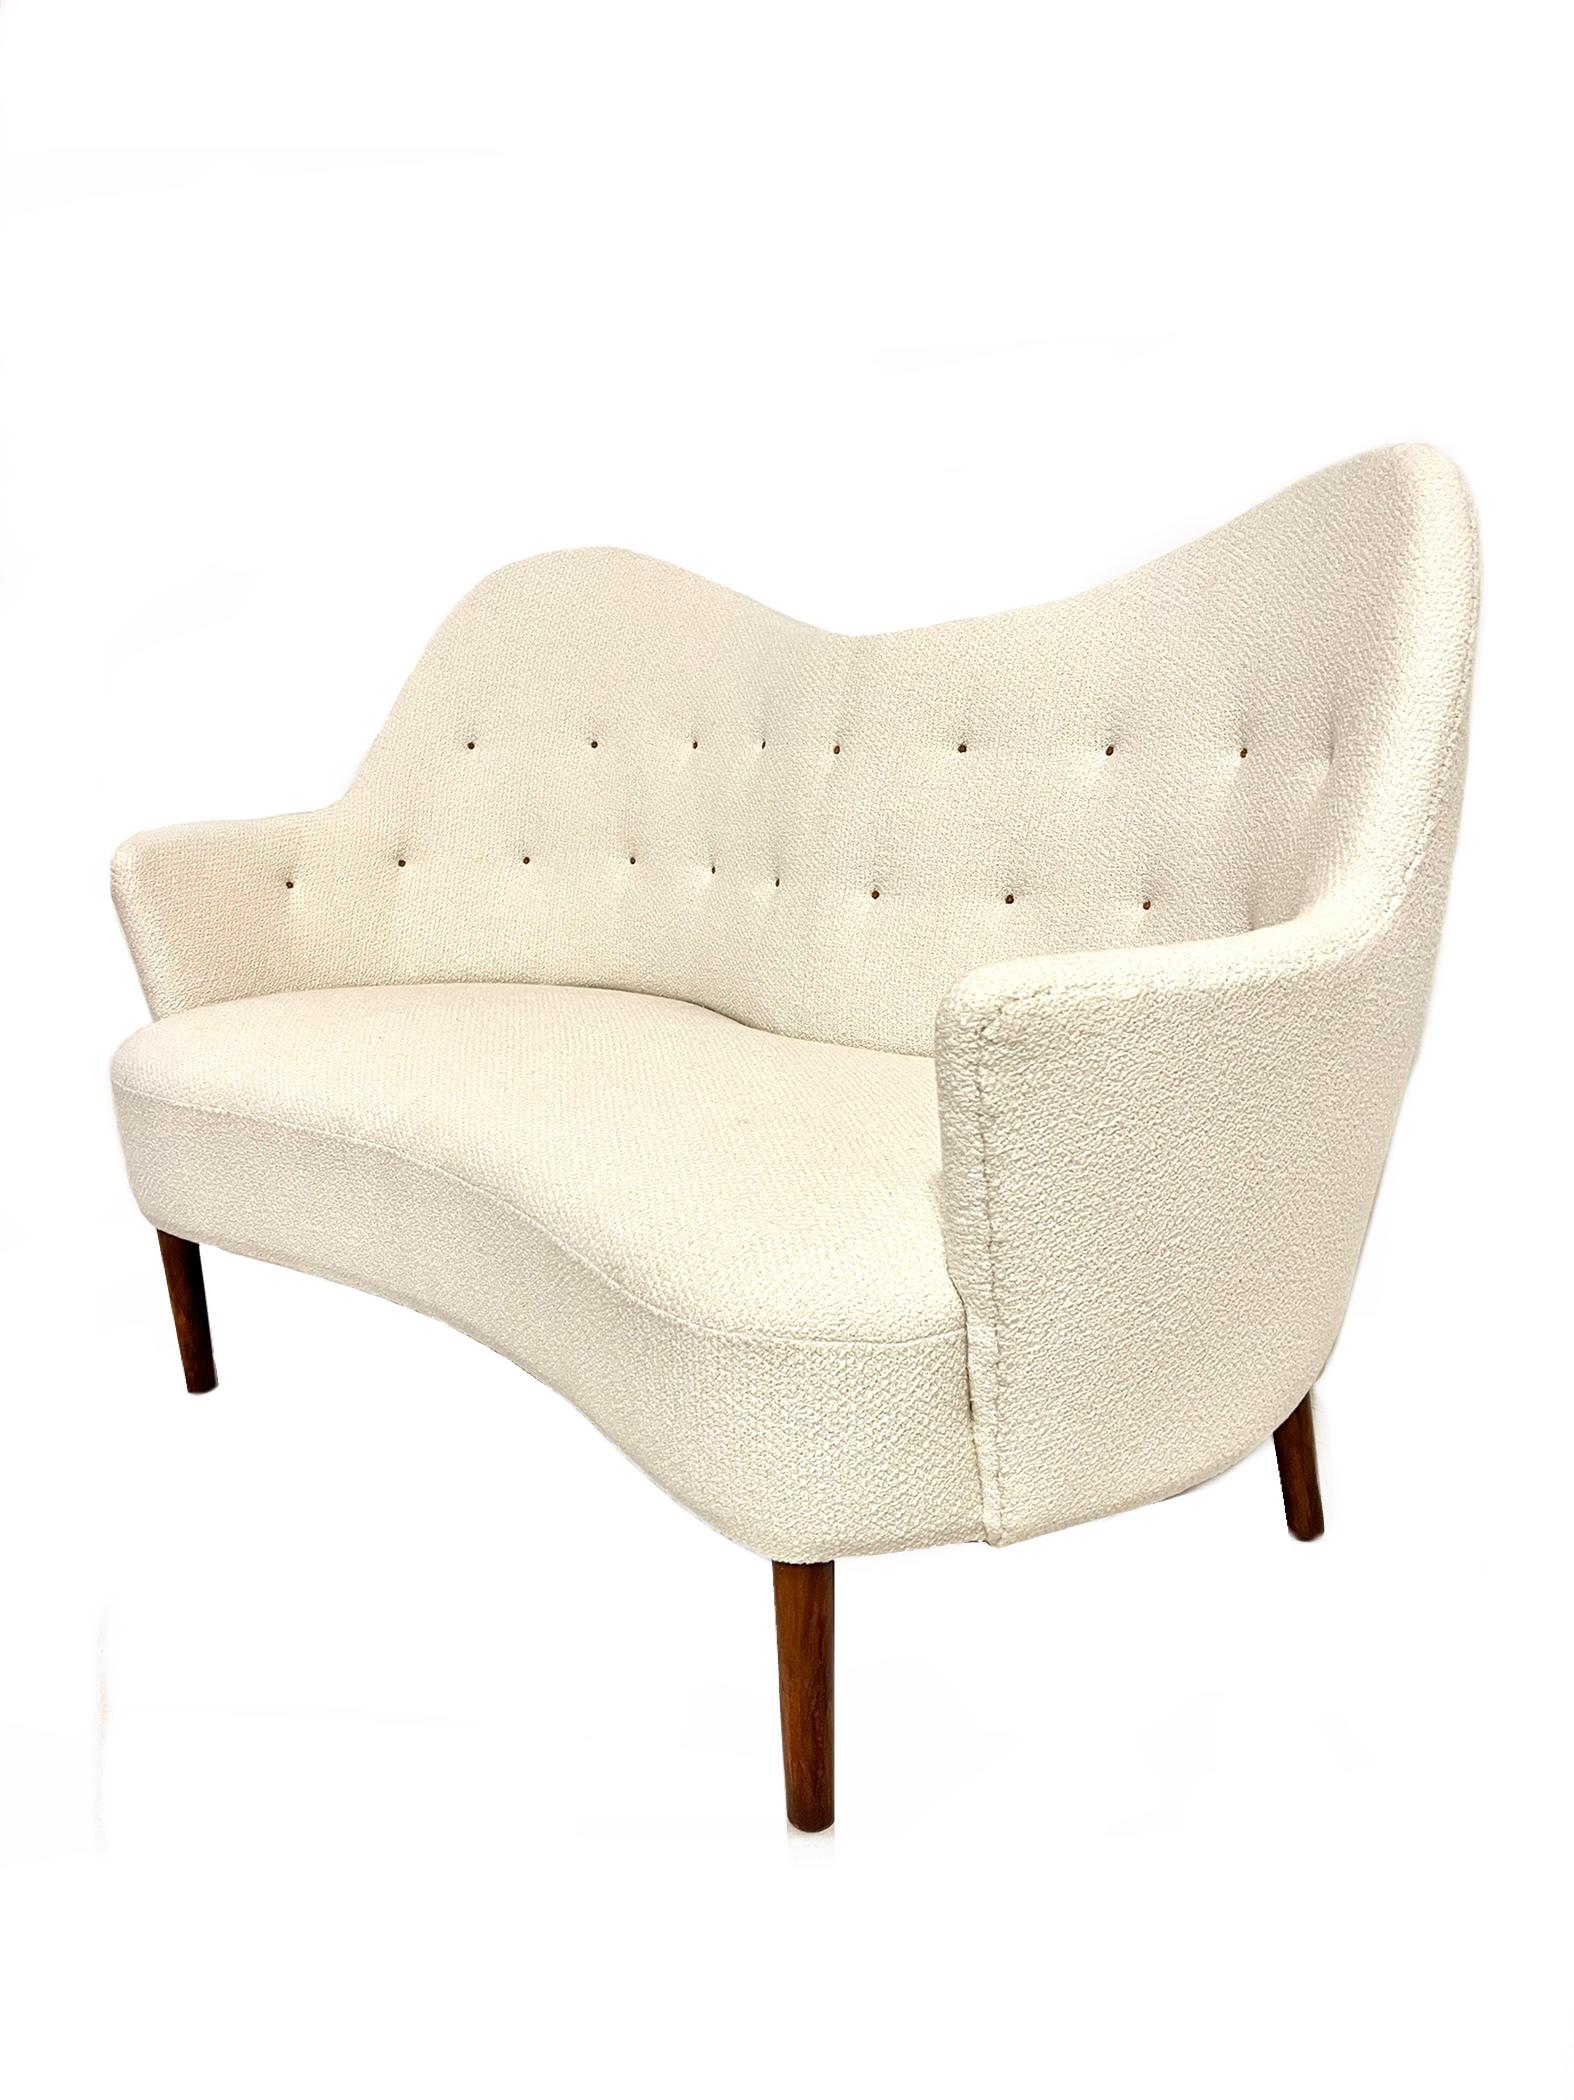 Loveseat with very curvy lines that surrounds you, by danish cabinet maker in the 1940’s. It has stained beech legs and upholstered in white bouclé, and the buttons are made of coreleather. It is upholstered on both sides, which makes it able to be